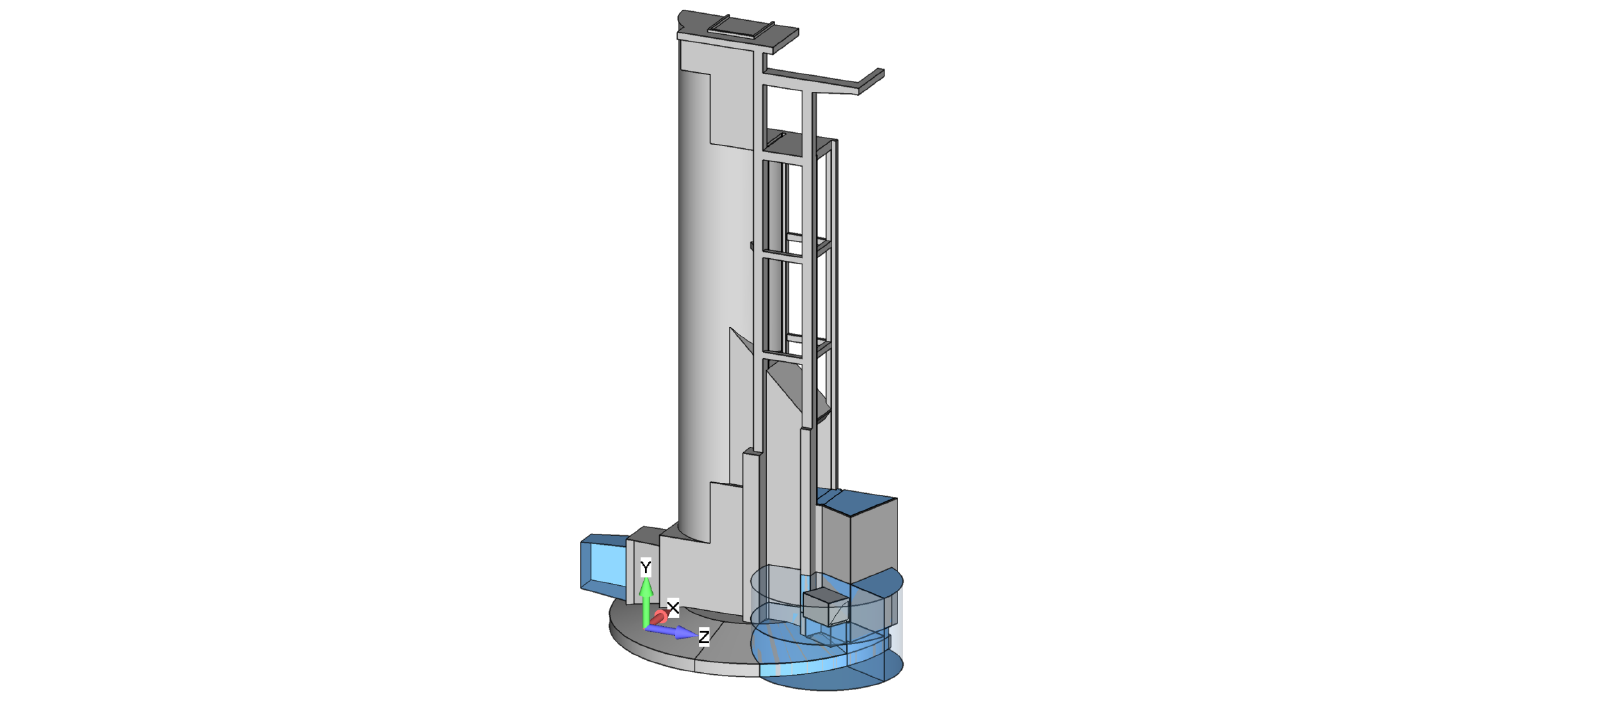 CFD idealized geometry of the dewatering system with relief gate.